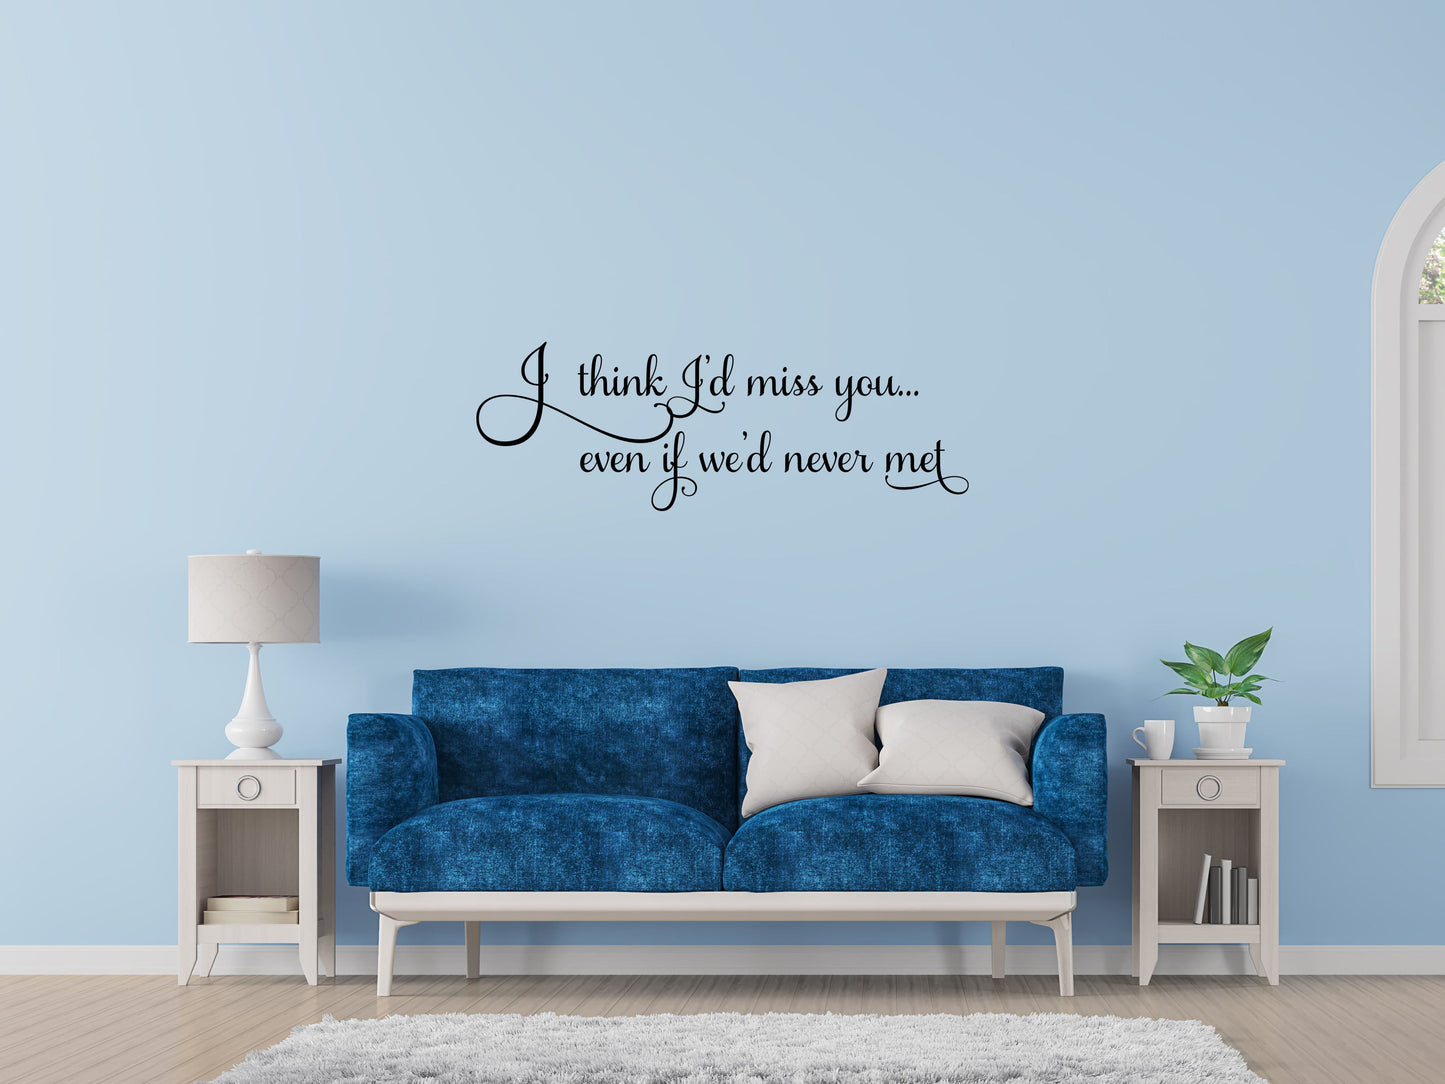 I Think I'd Miss You Even If We'd Never Met - Inspirational Wall Decals Vinyl Wall Decal Inspirational Wall Signs 